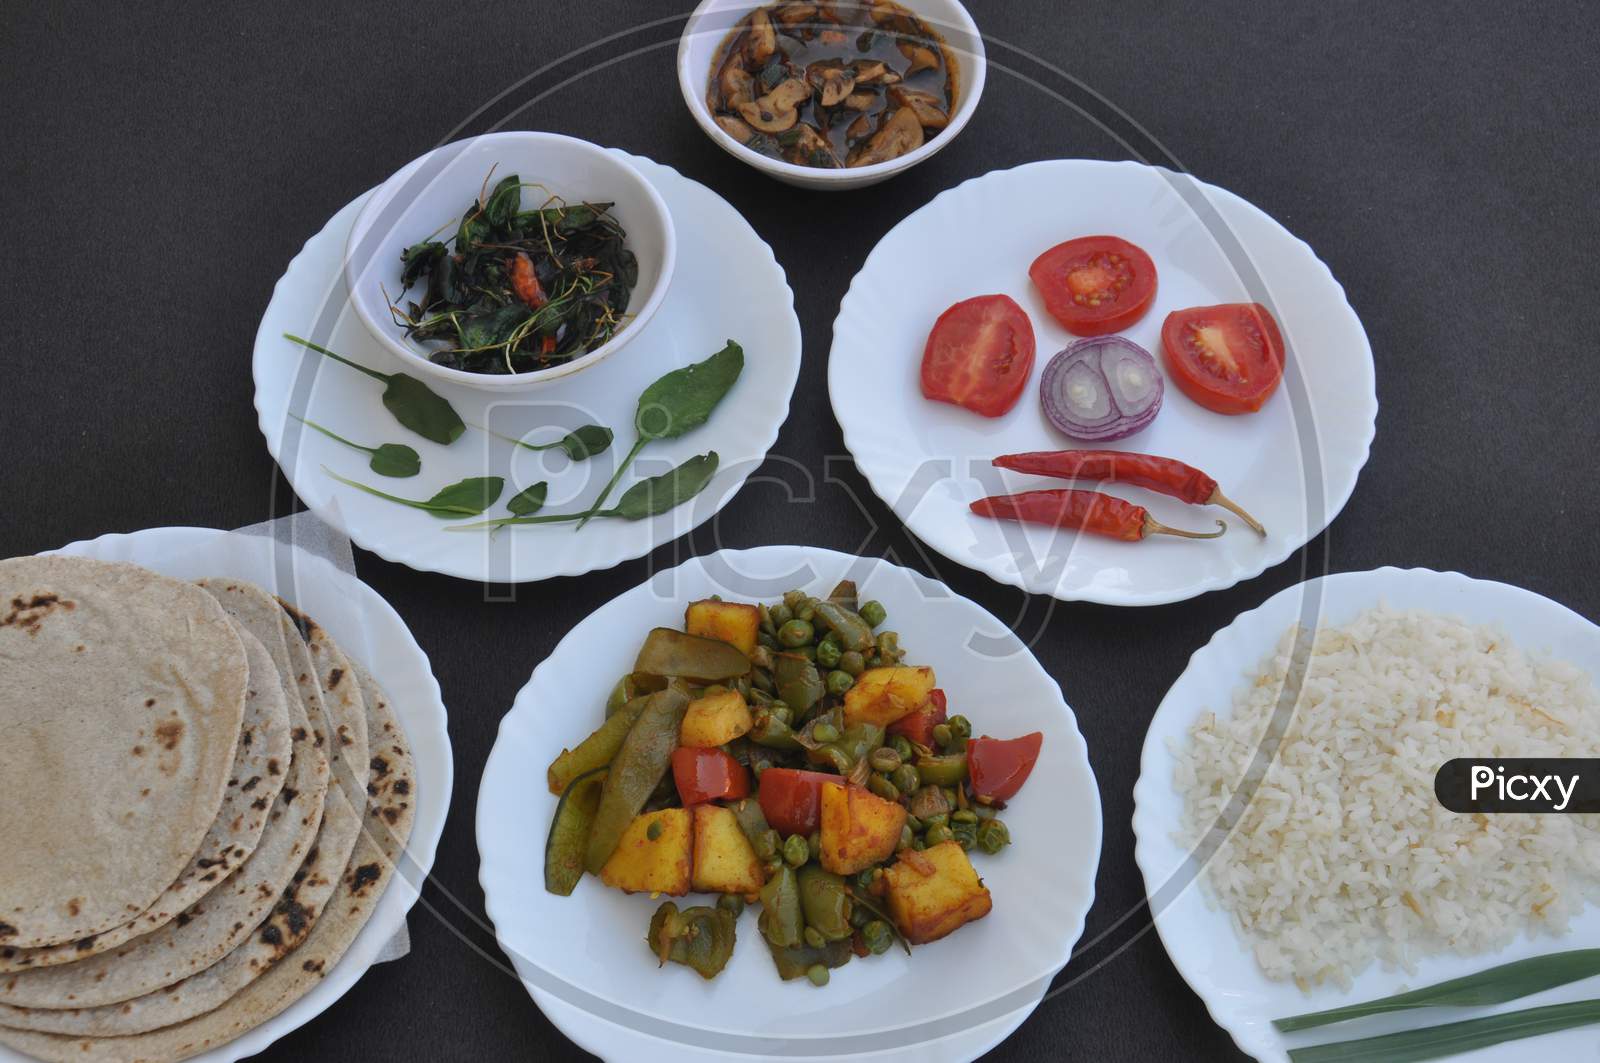 Indian Food - Mushroom soup, saag (greens), salad, chapati (Indian flat bread), matar paneer mix veg and chawal (rice) in white plates over black background